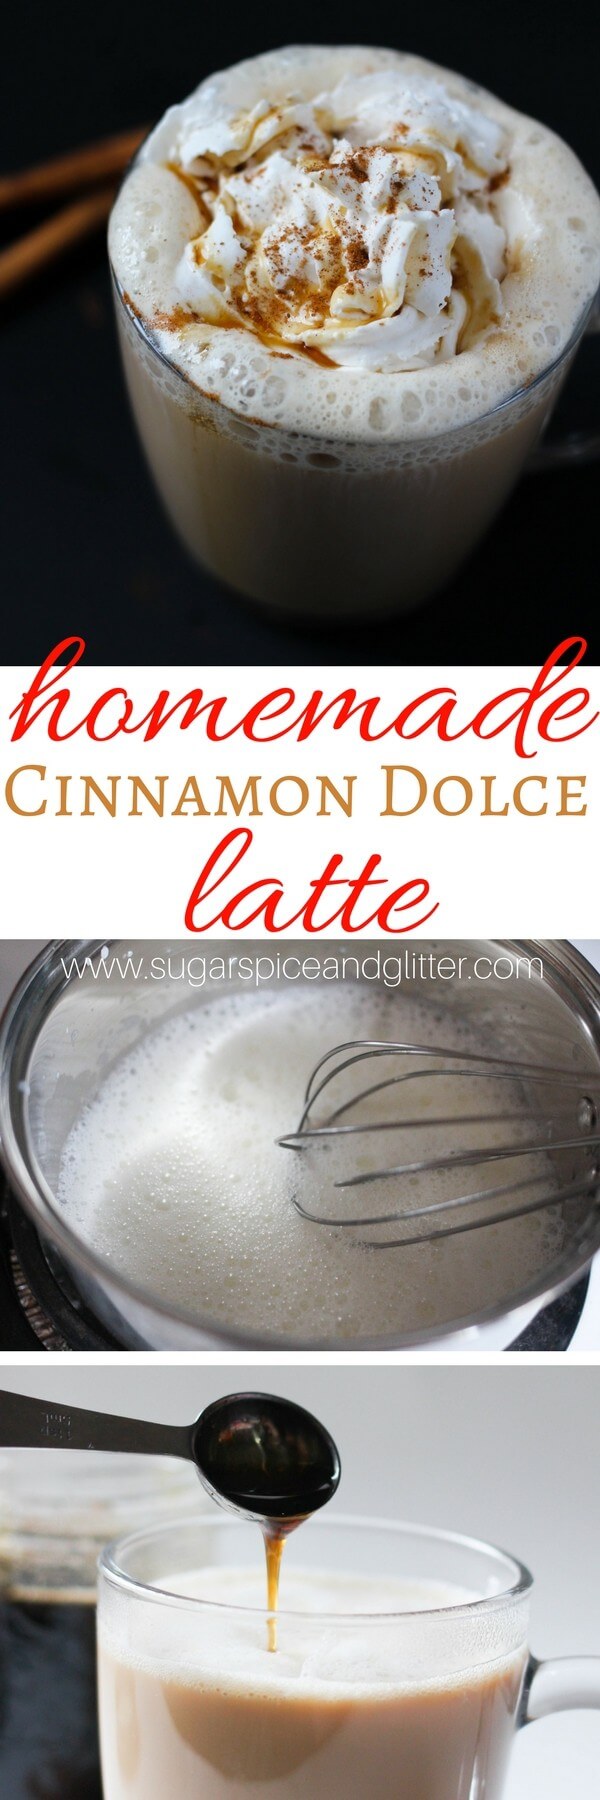 An easy homemade cinnamon dolce latte with easy homemade cinnamon coffee syrup - Starbucks flavor for a fraction of the cost